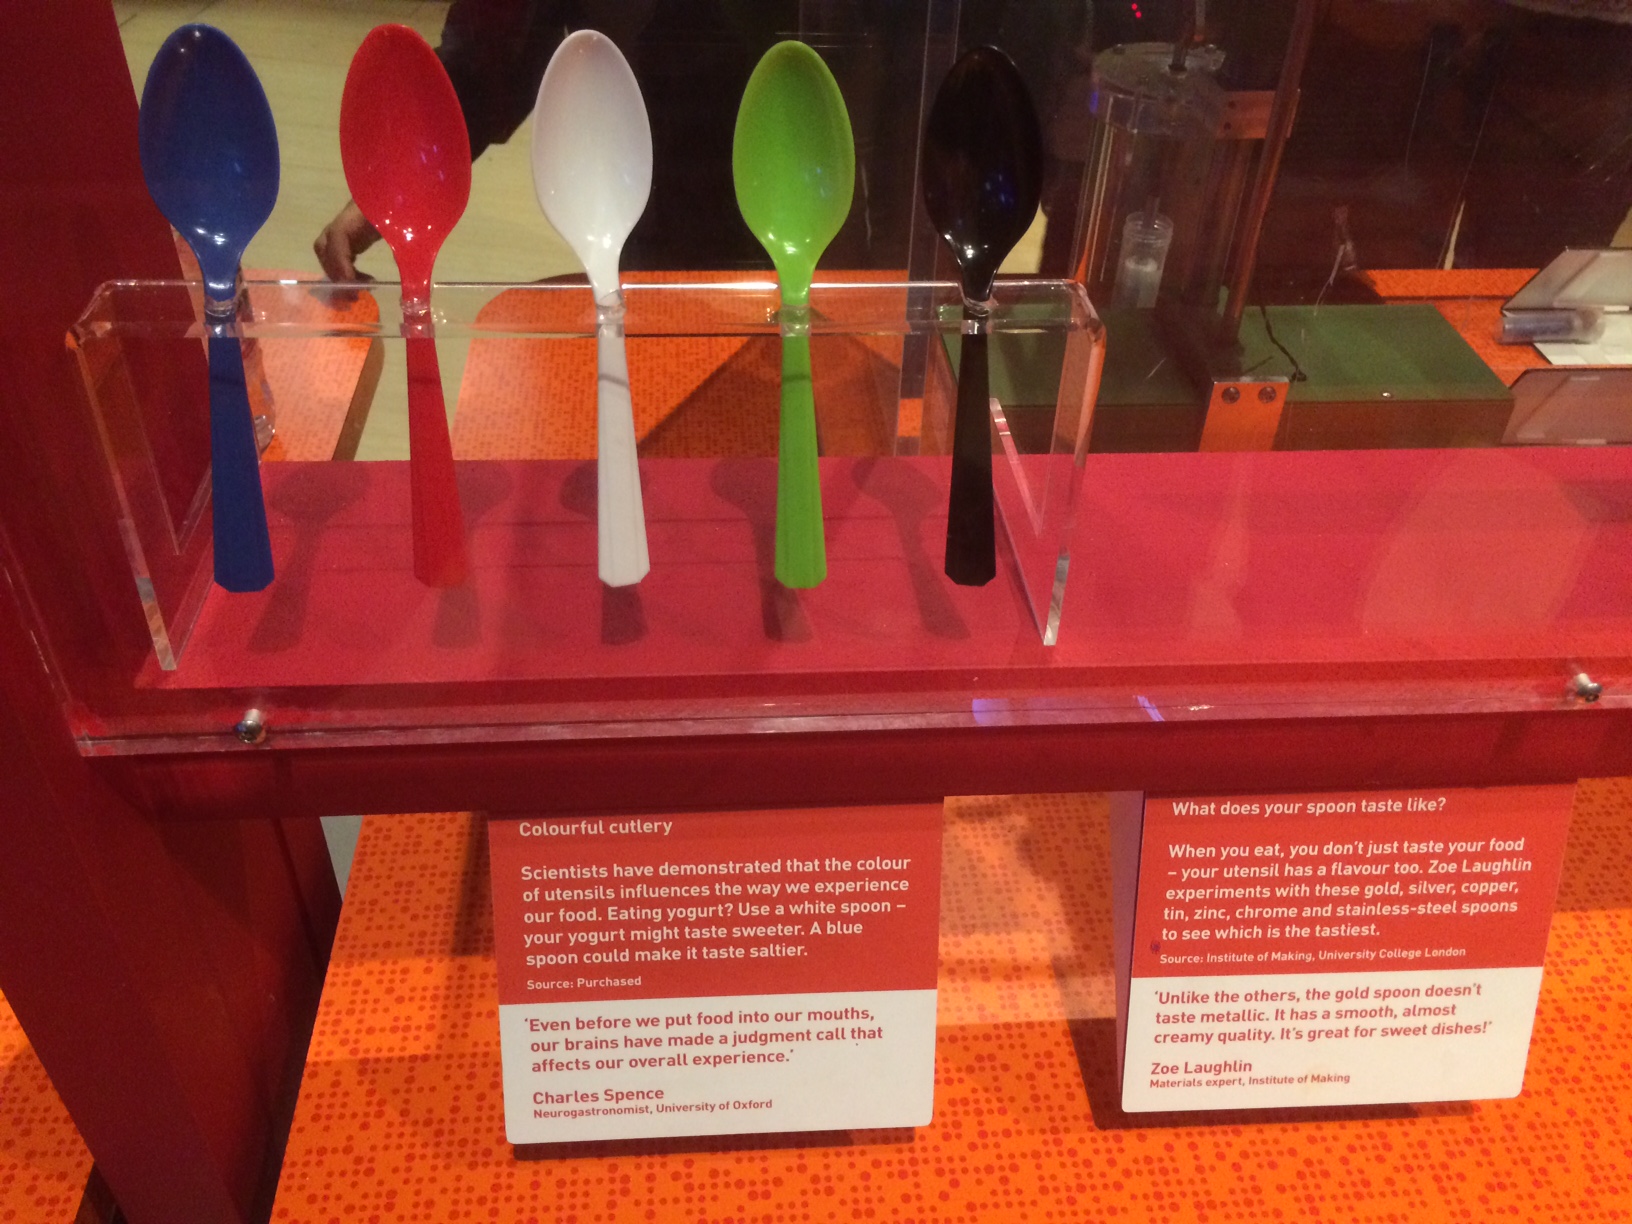 A display of five spoons in different colours: blue, red, white, green, black.